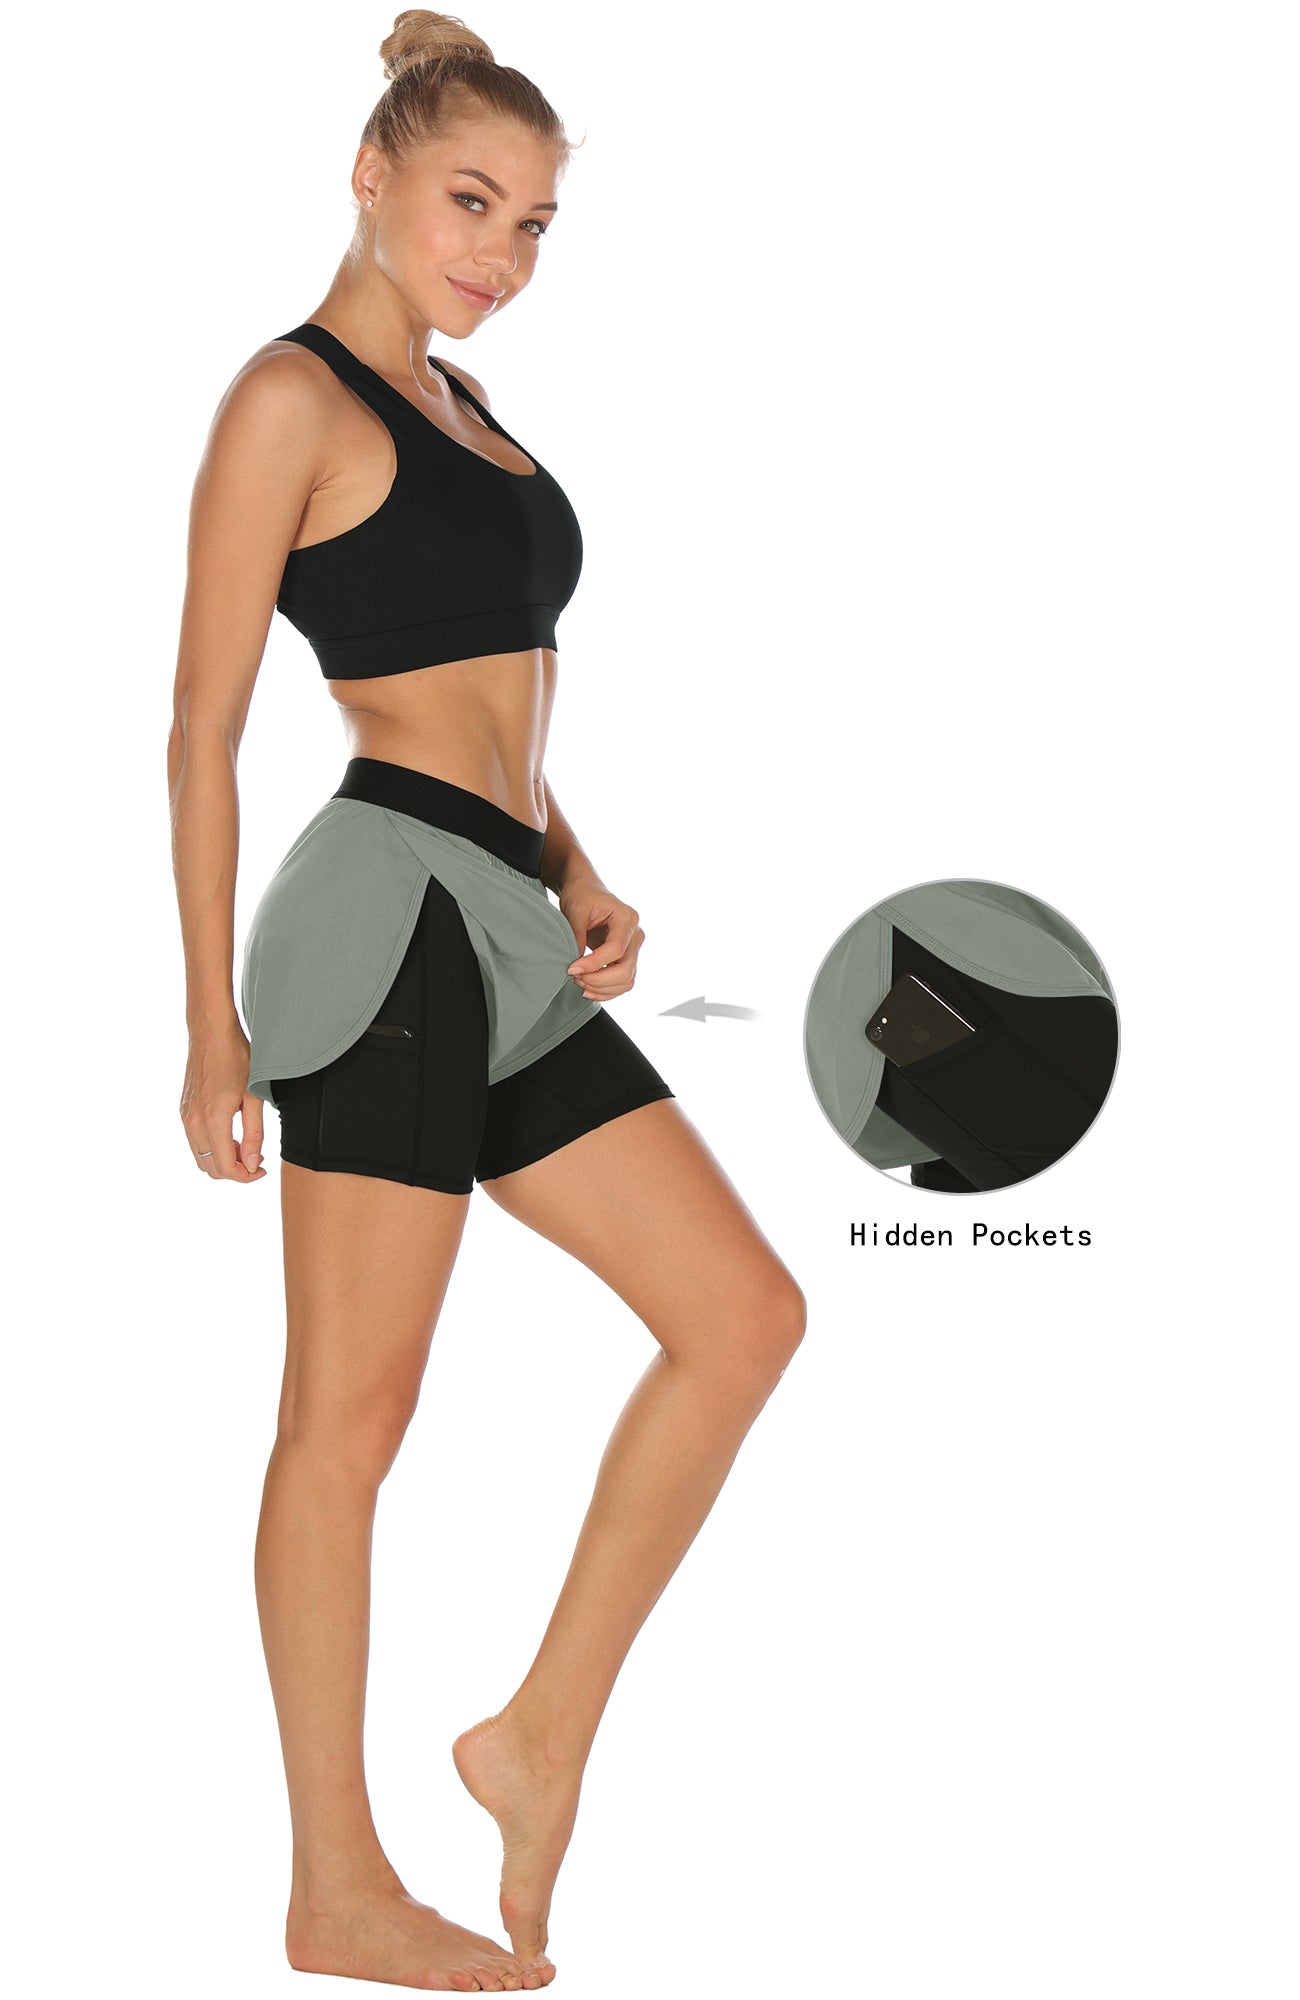 Women's Running Shorts Gym Athletic Shorts 2-in-1 Pockets